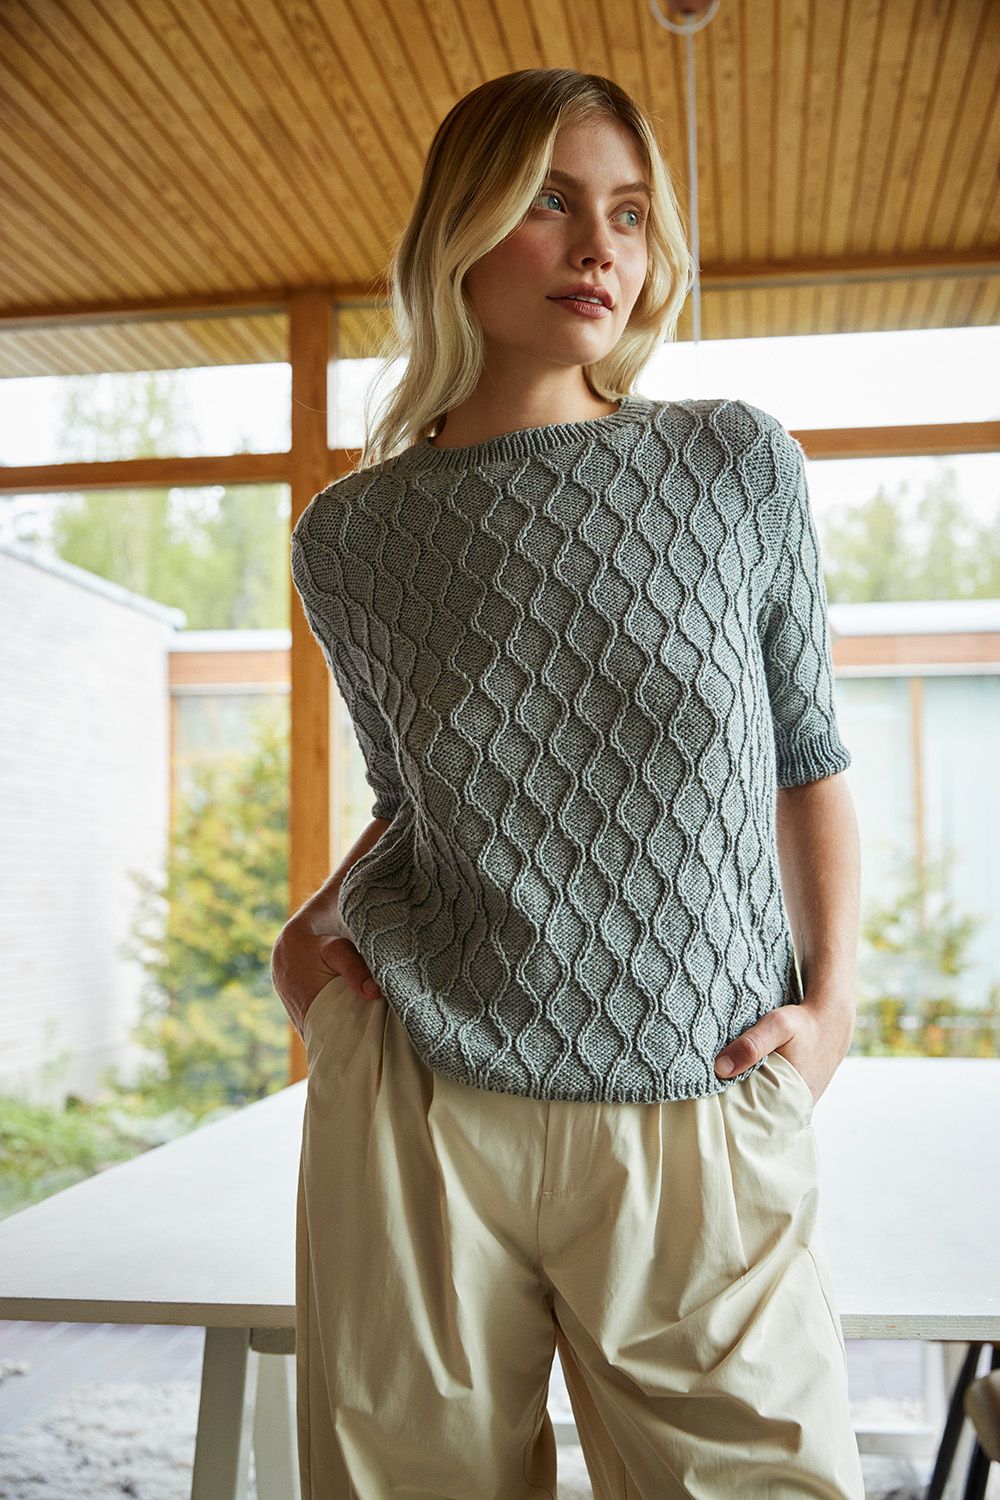 Novita Woolly Wood: Ajatus (Thought) knitted sweater Example 1